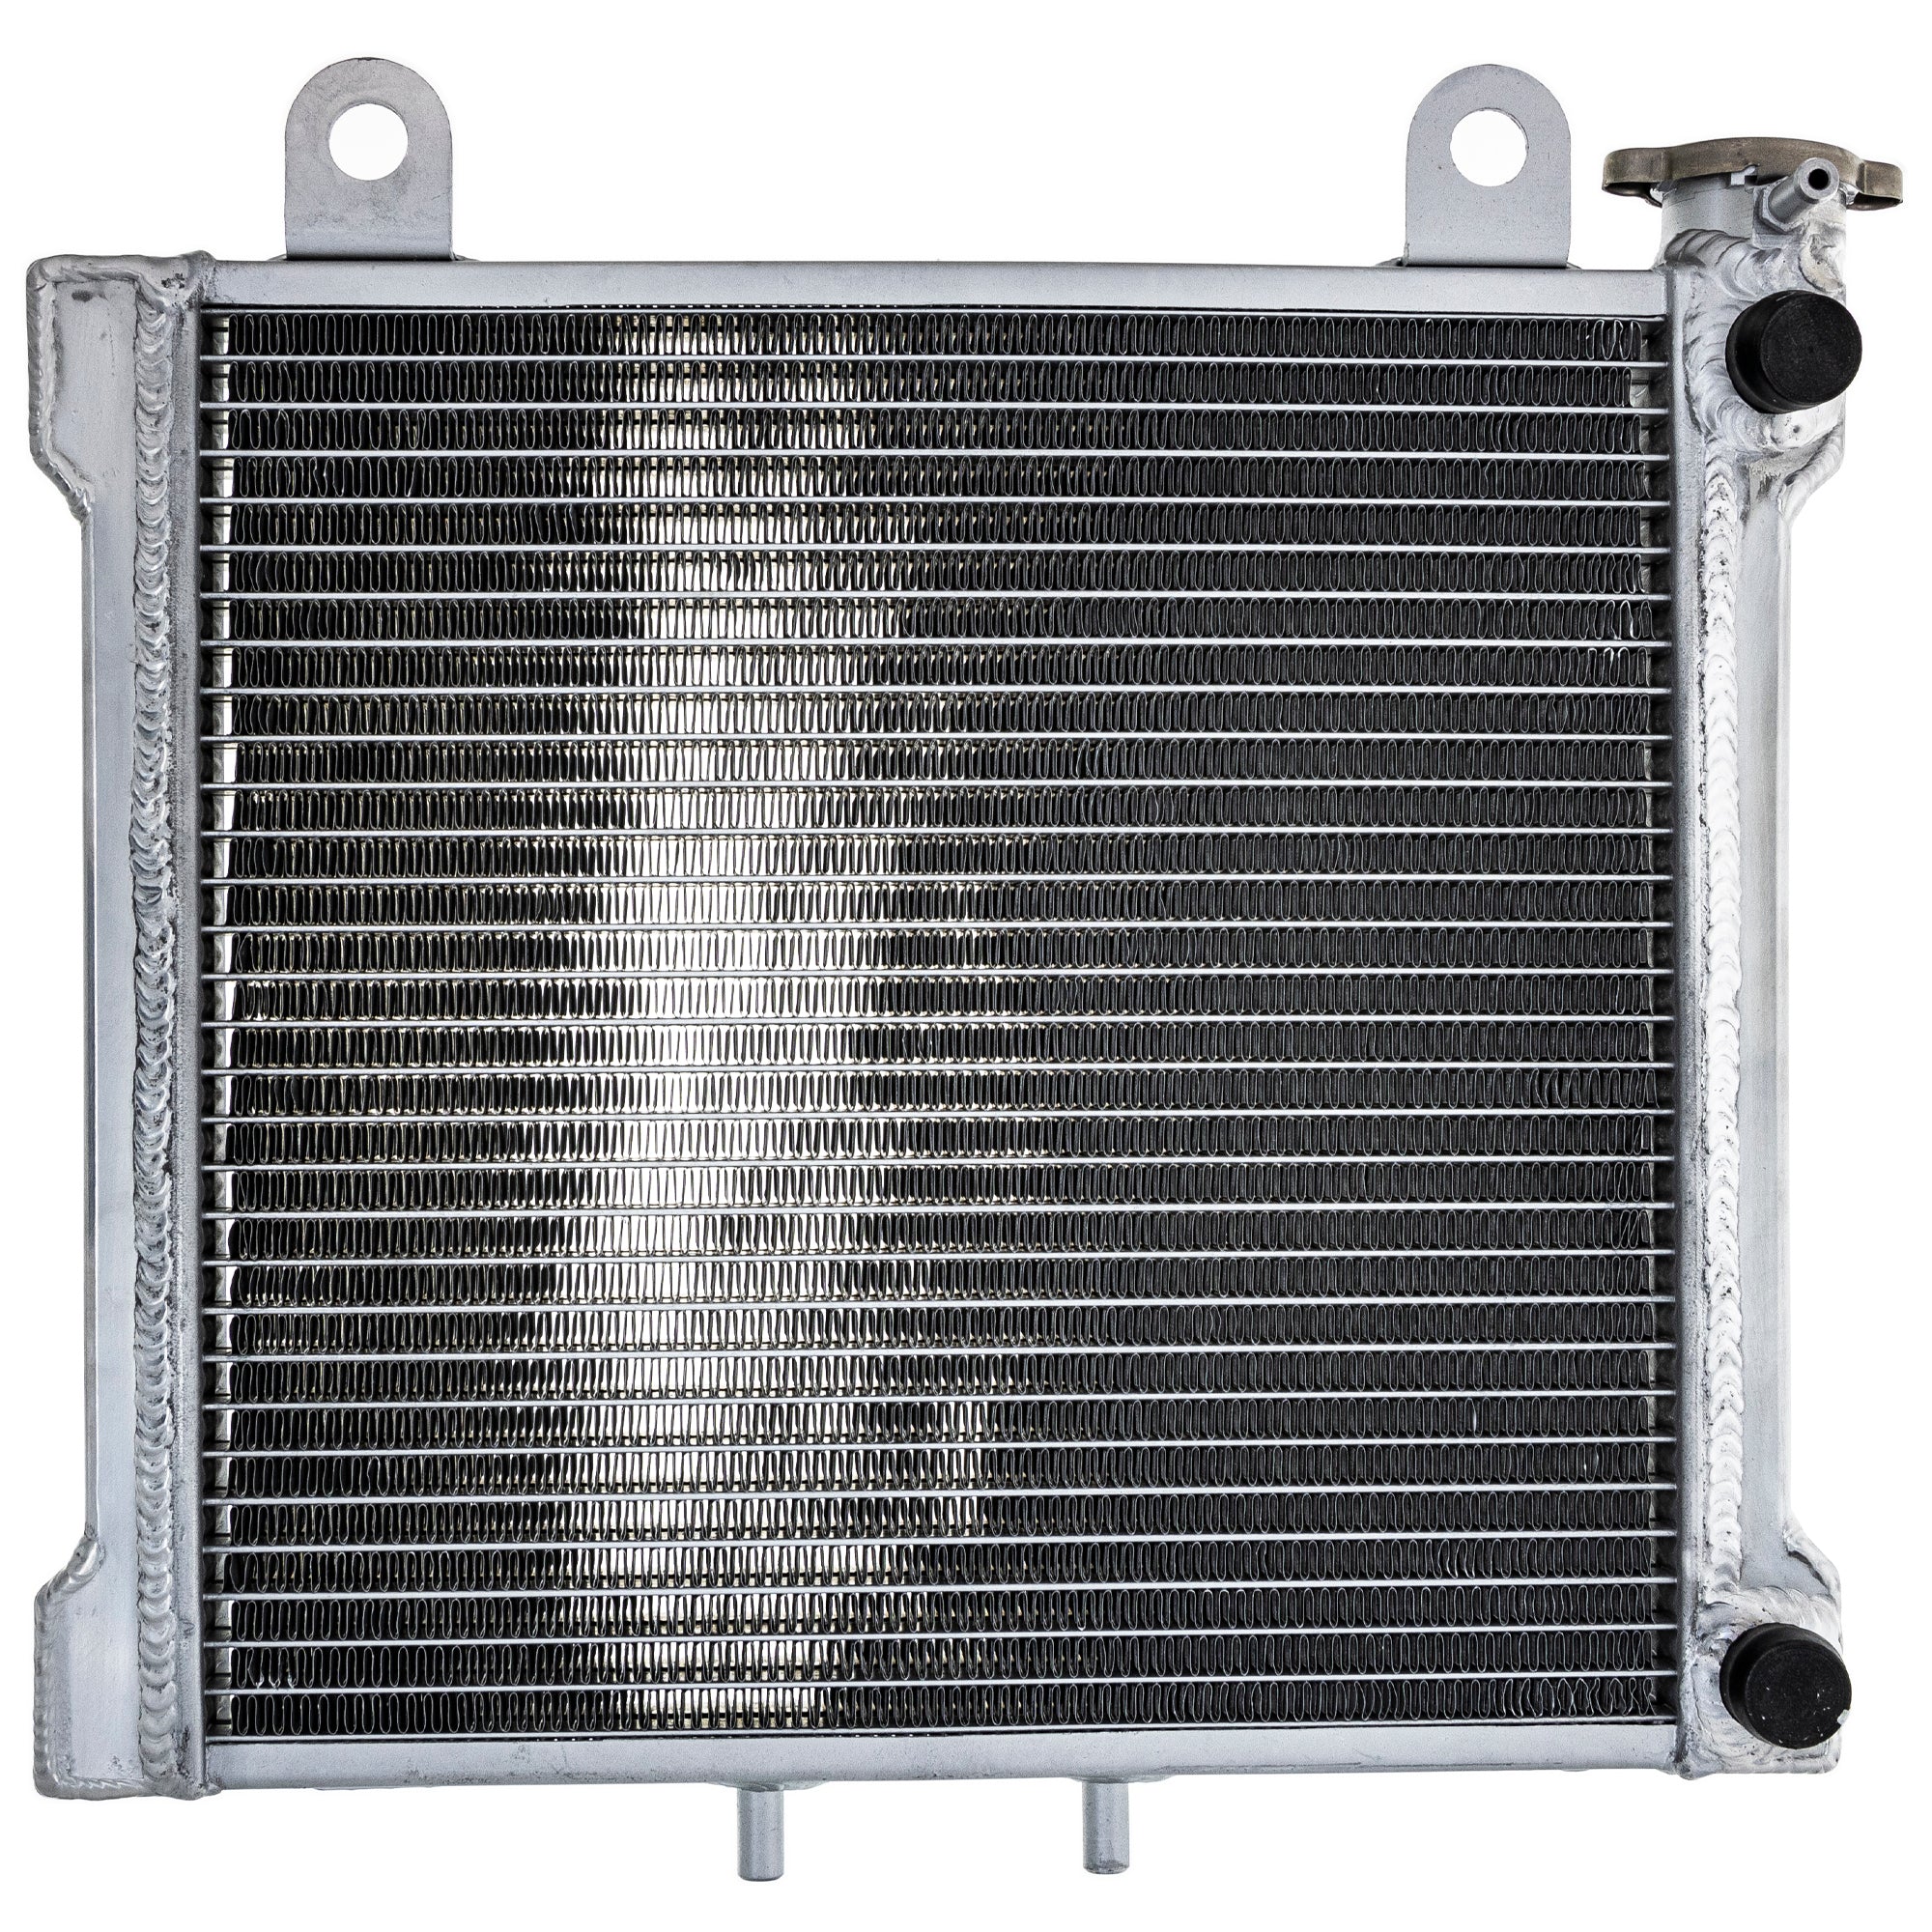 High Capacity Radiator For Bombardier Can-Am 709200145 709200070 709200019